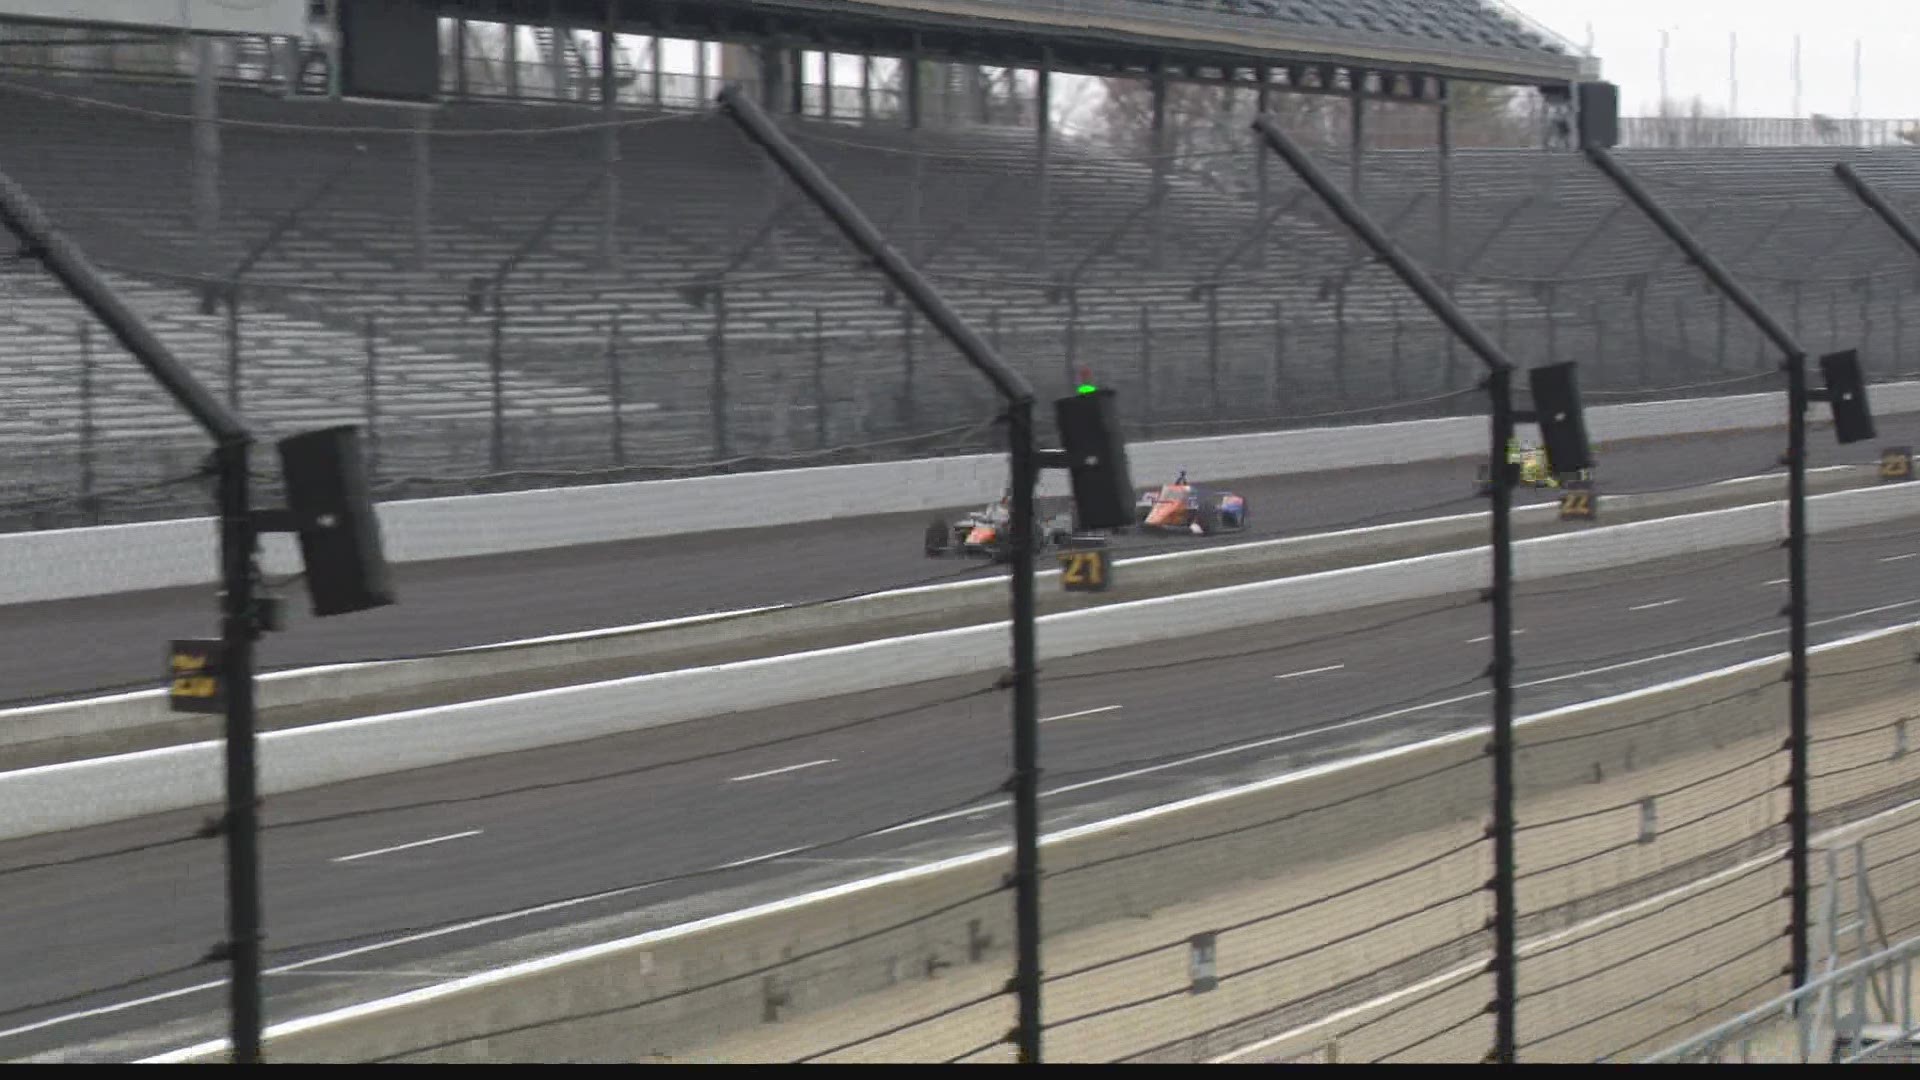 Several drivers took to the track Friday to test new technology.